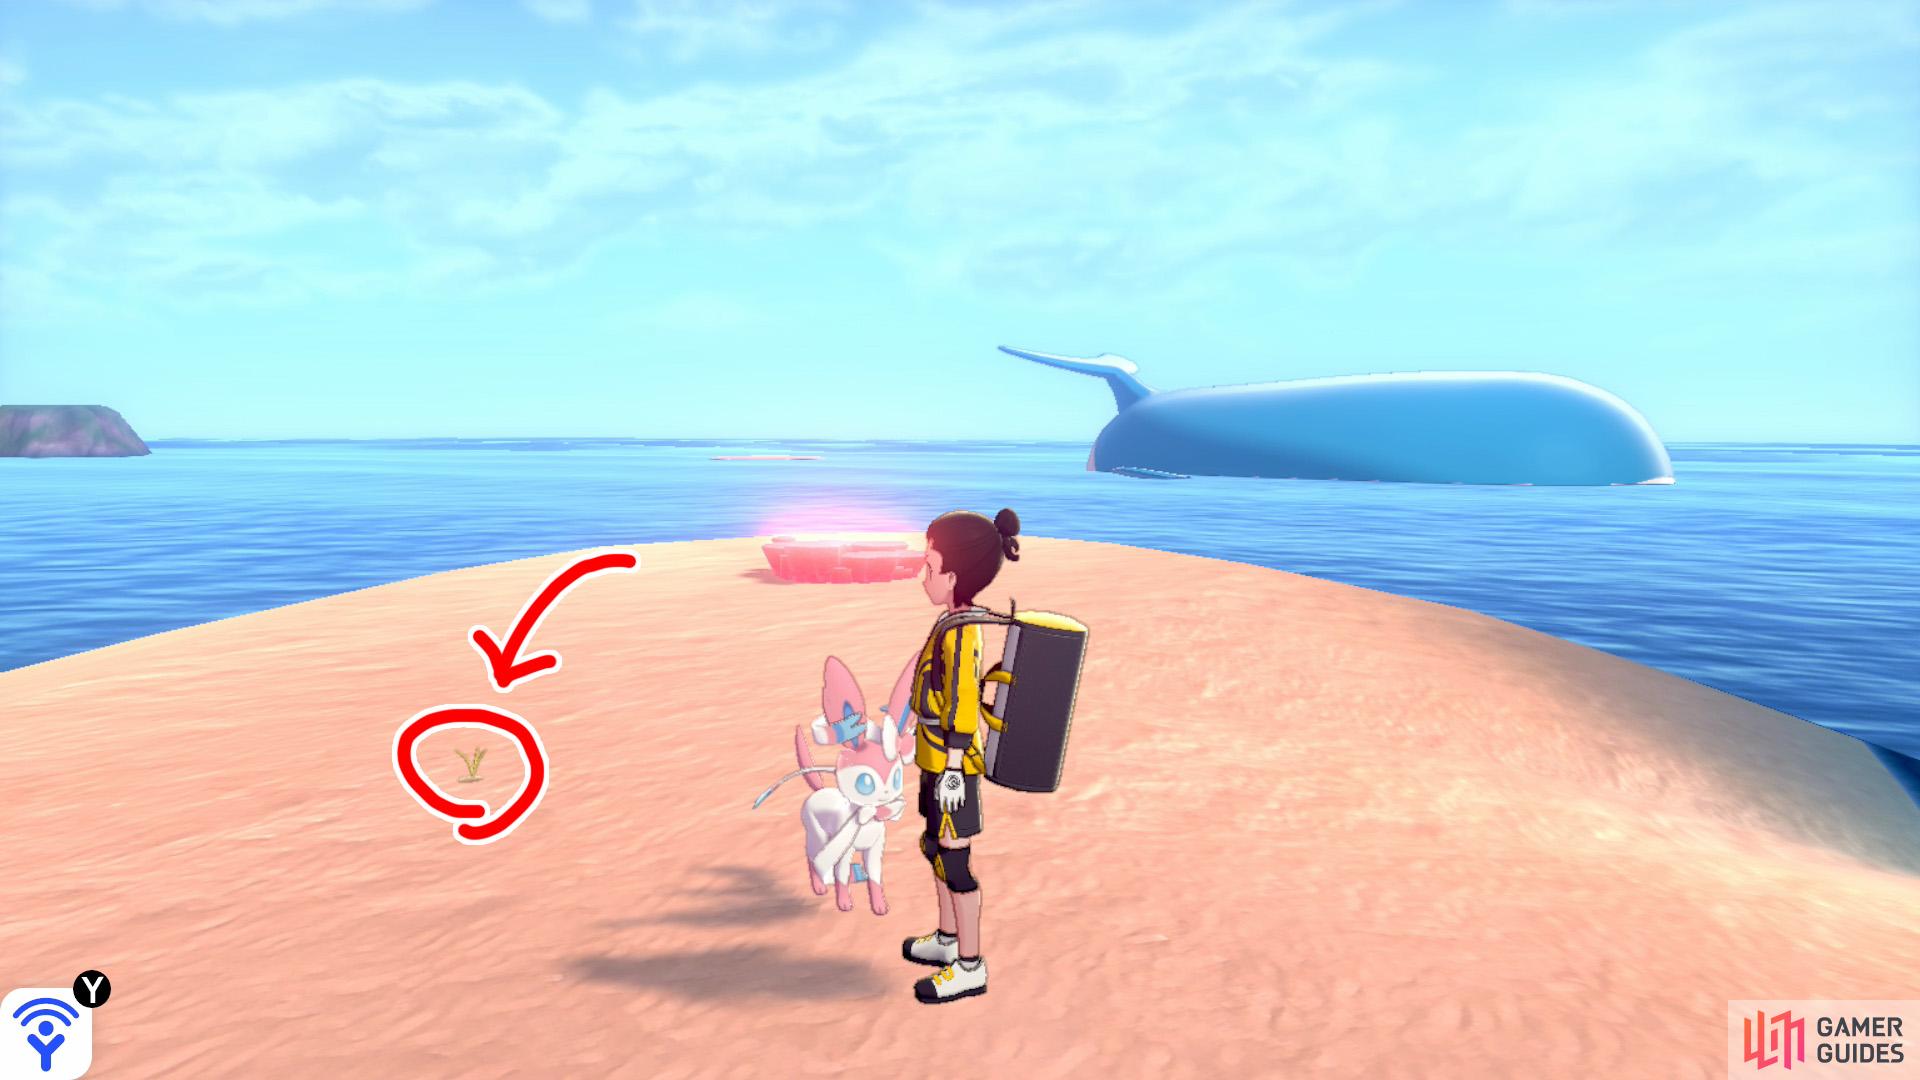 1/11: Start from Armor Station in the Fields of Armor (fly there, if possible), then enter the ocean straight ahead. Head towards the first islet that's ahead and slightly to the left. Turn left a bit and swim to the longer islet up ahead (with a Pokémon Den). It's in the middle of that islet.